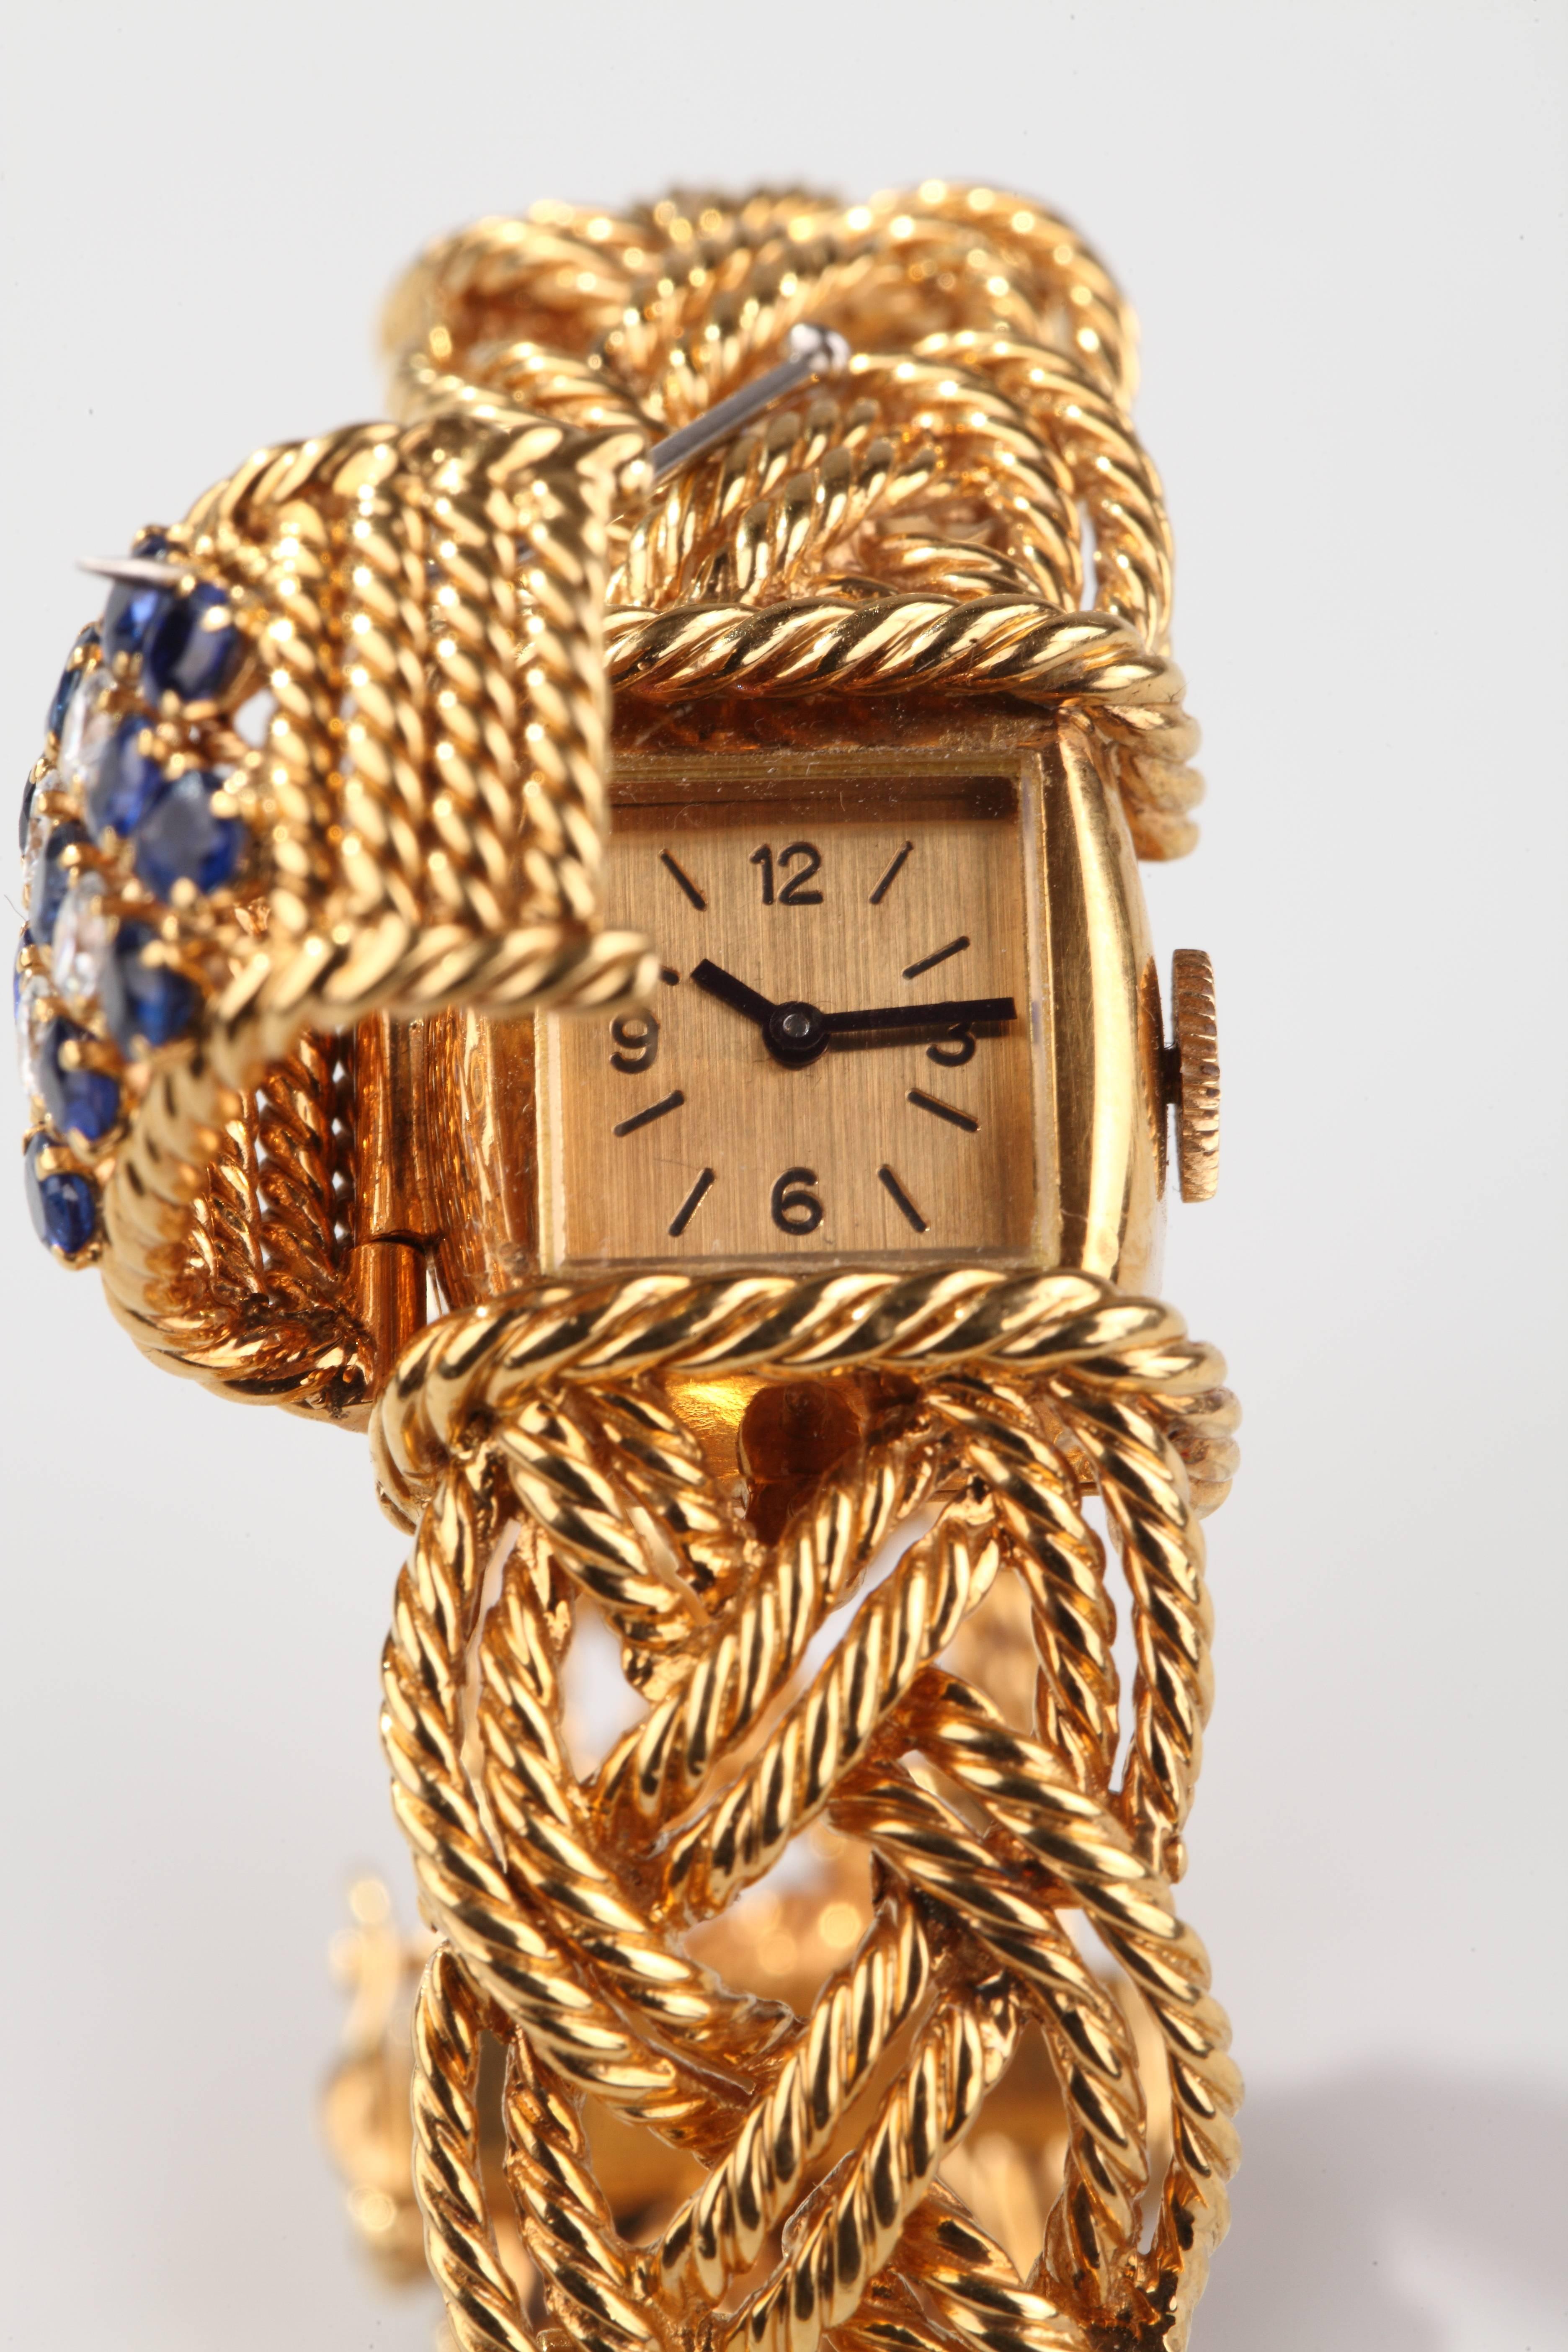 Boucheron Paris Formed of twisted yellow gold rope centered by a motif set with brillant cut diamonds and round blue sapphires, hiding a yellow gold watch.
Mechanical movement.
French assay marks for gold.
Signed and numbered .